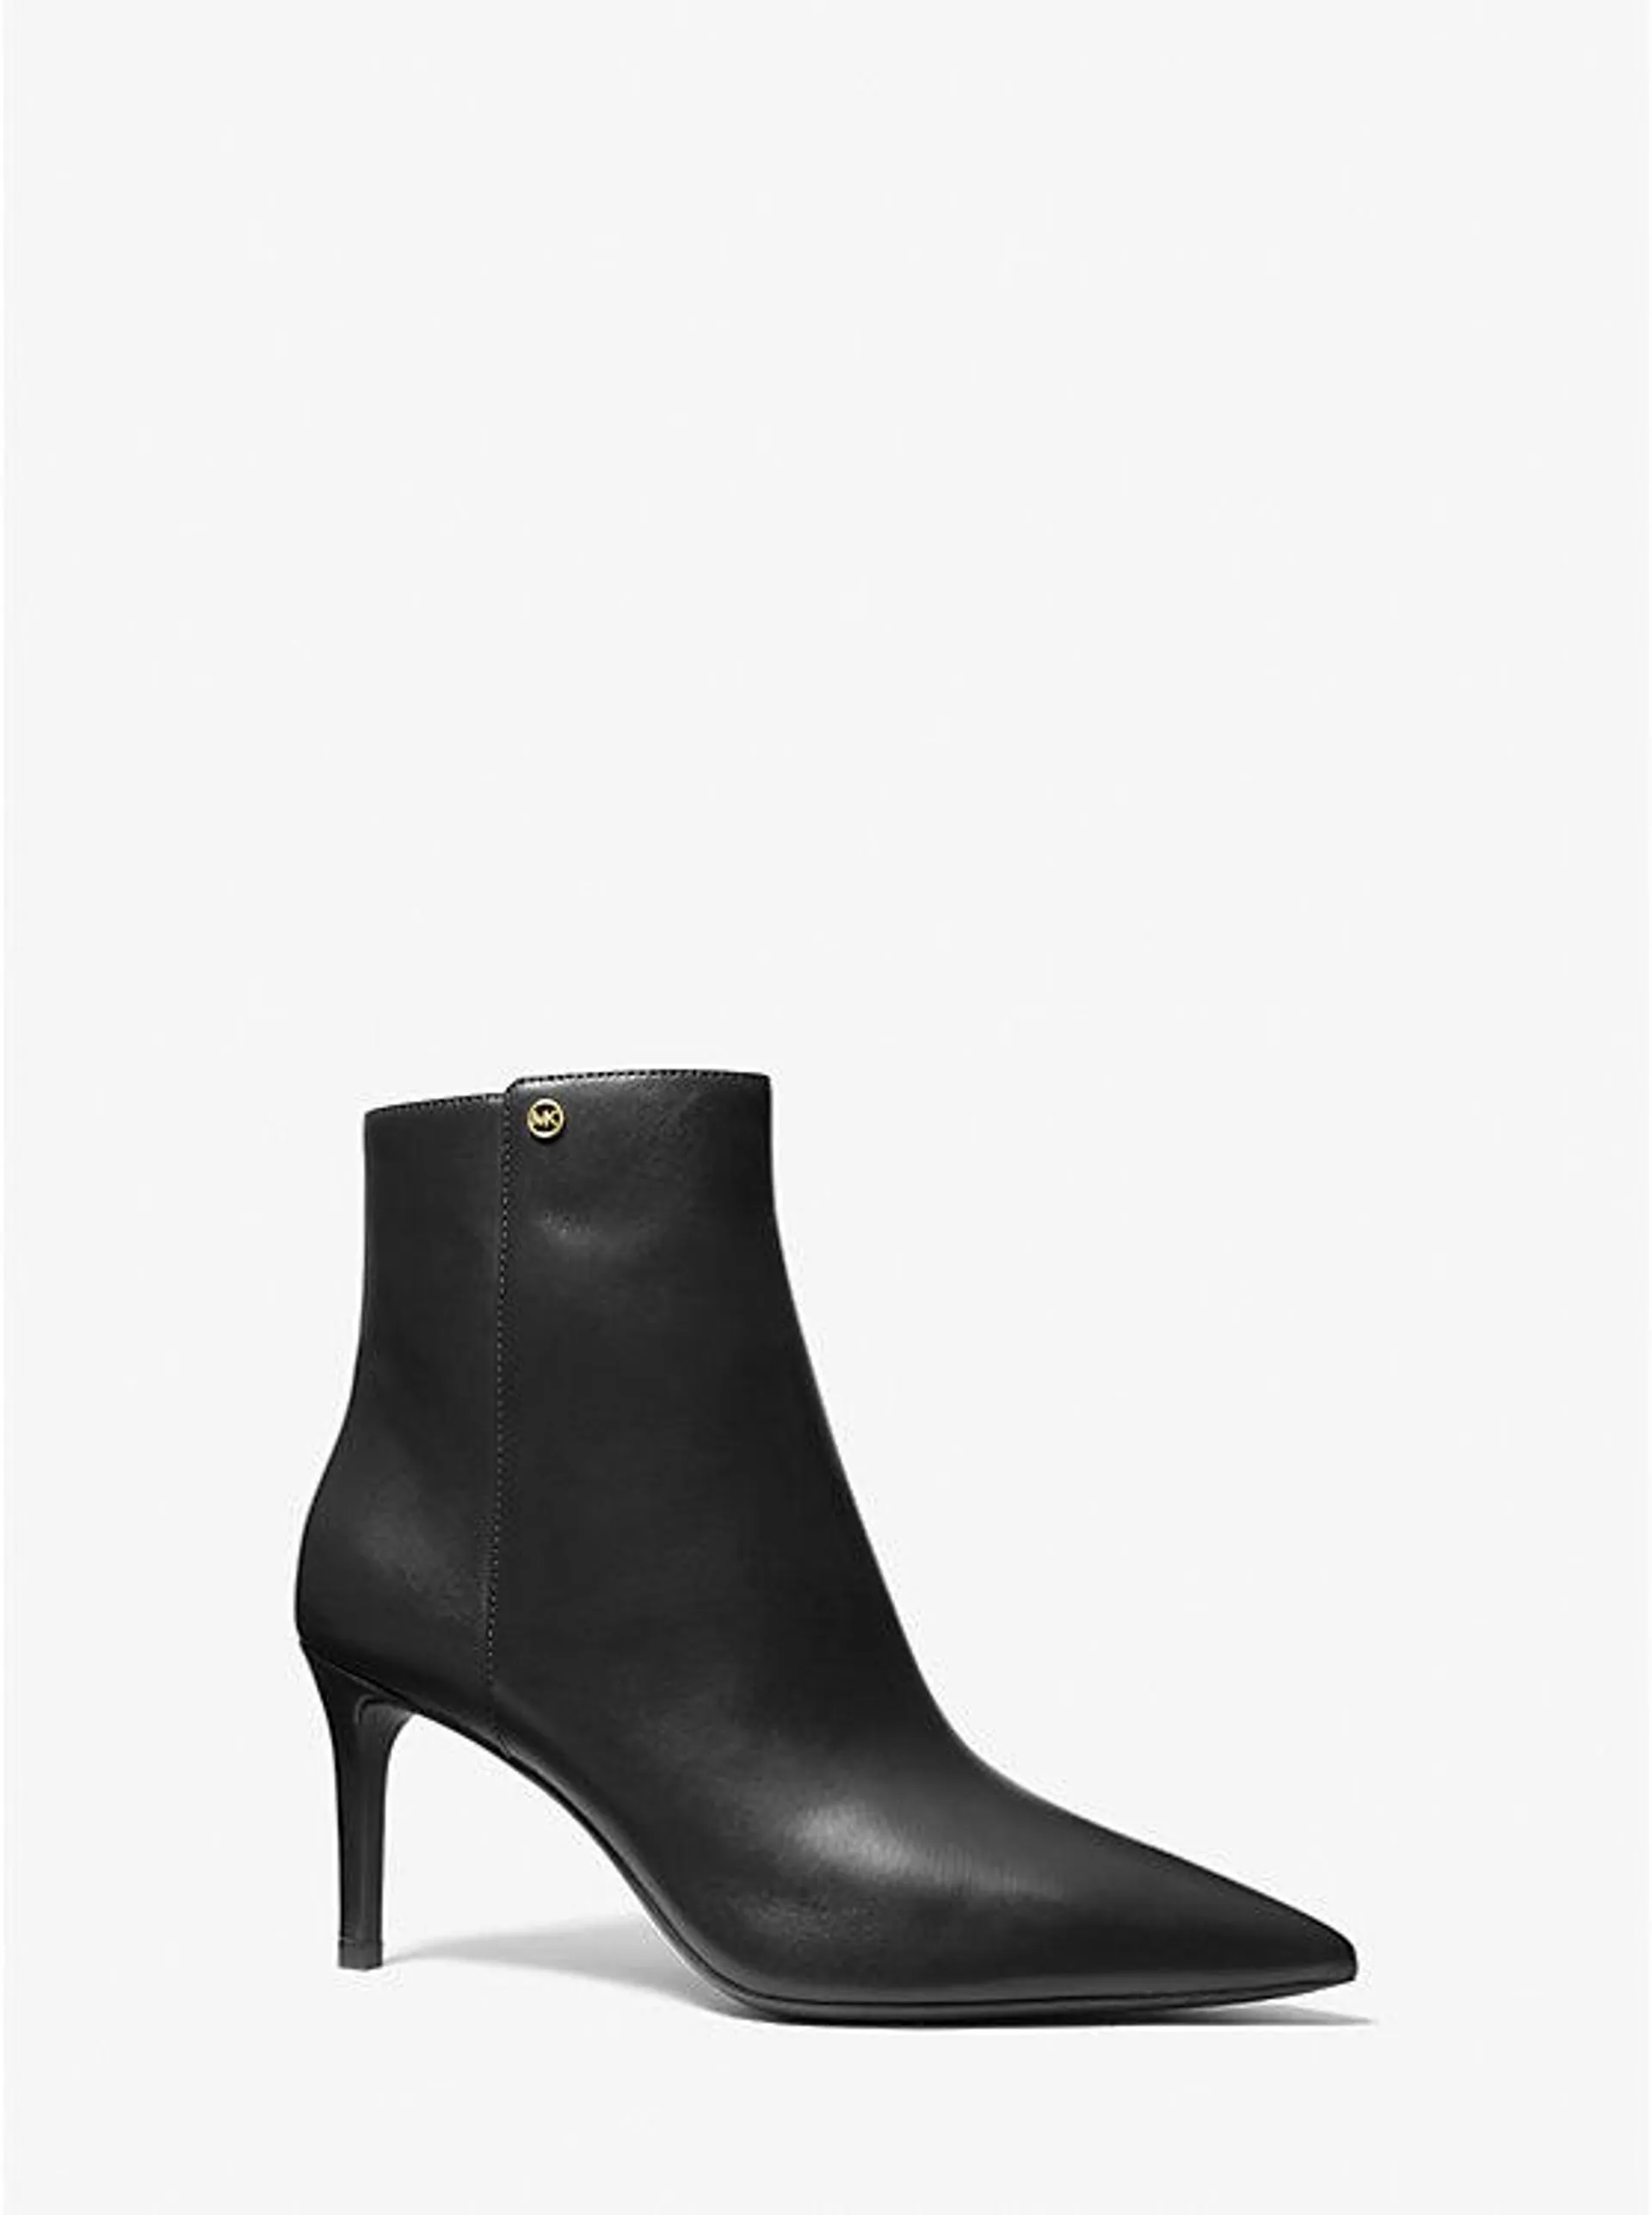 Alina Flex Leather Ankle Boot